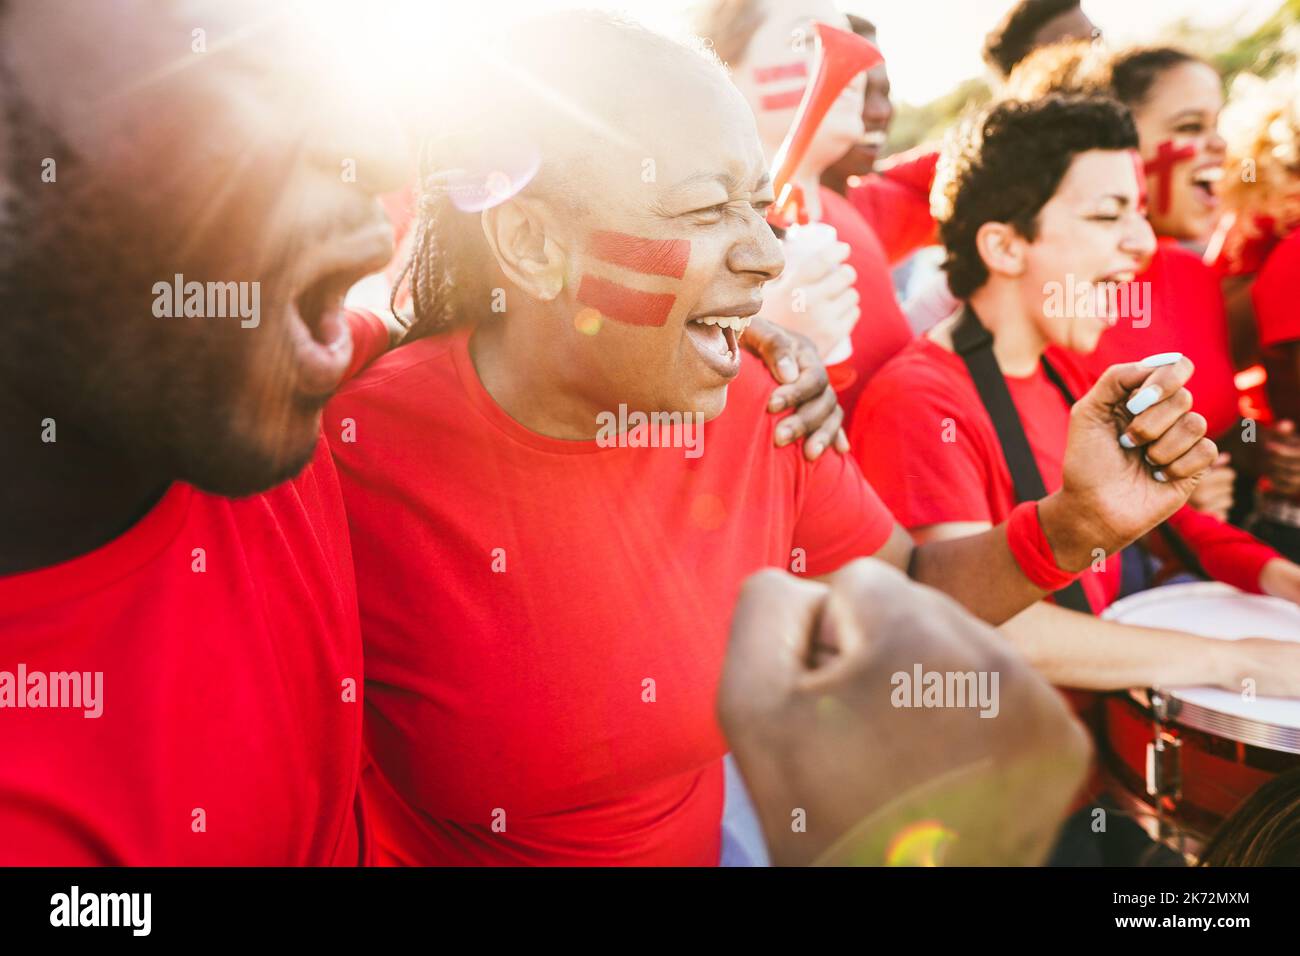 African red sport fans screaming while supporting their team - Football supporters having fun at competition event - Focus on senior woman face Stock Photo